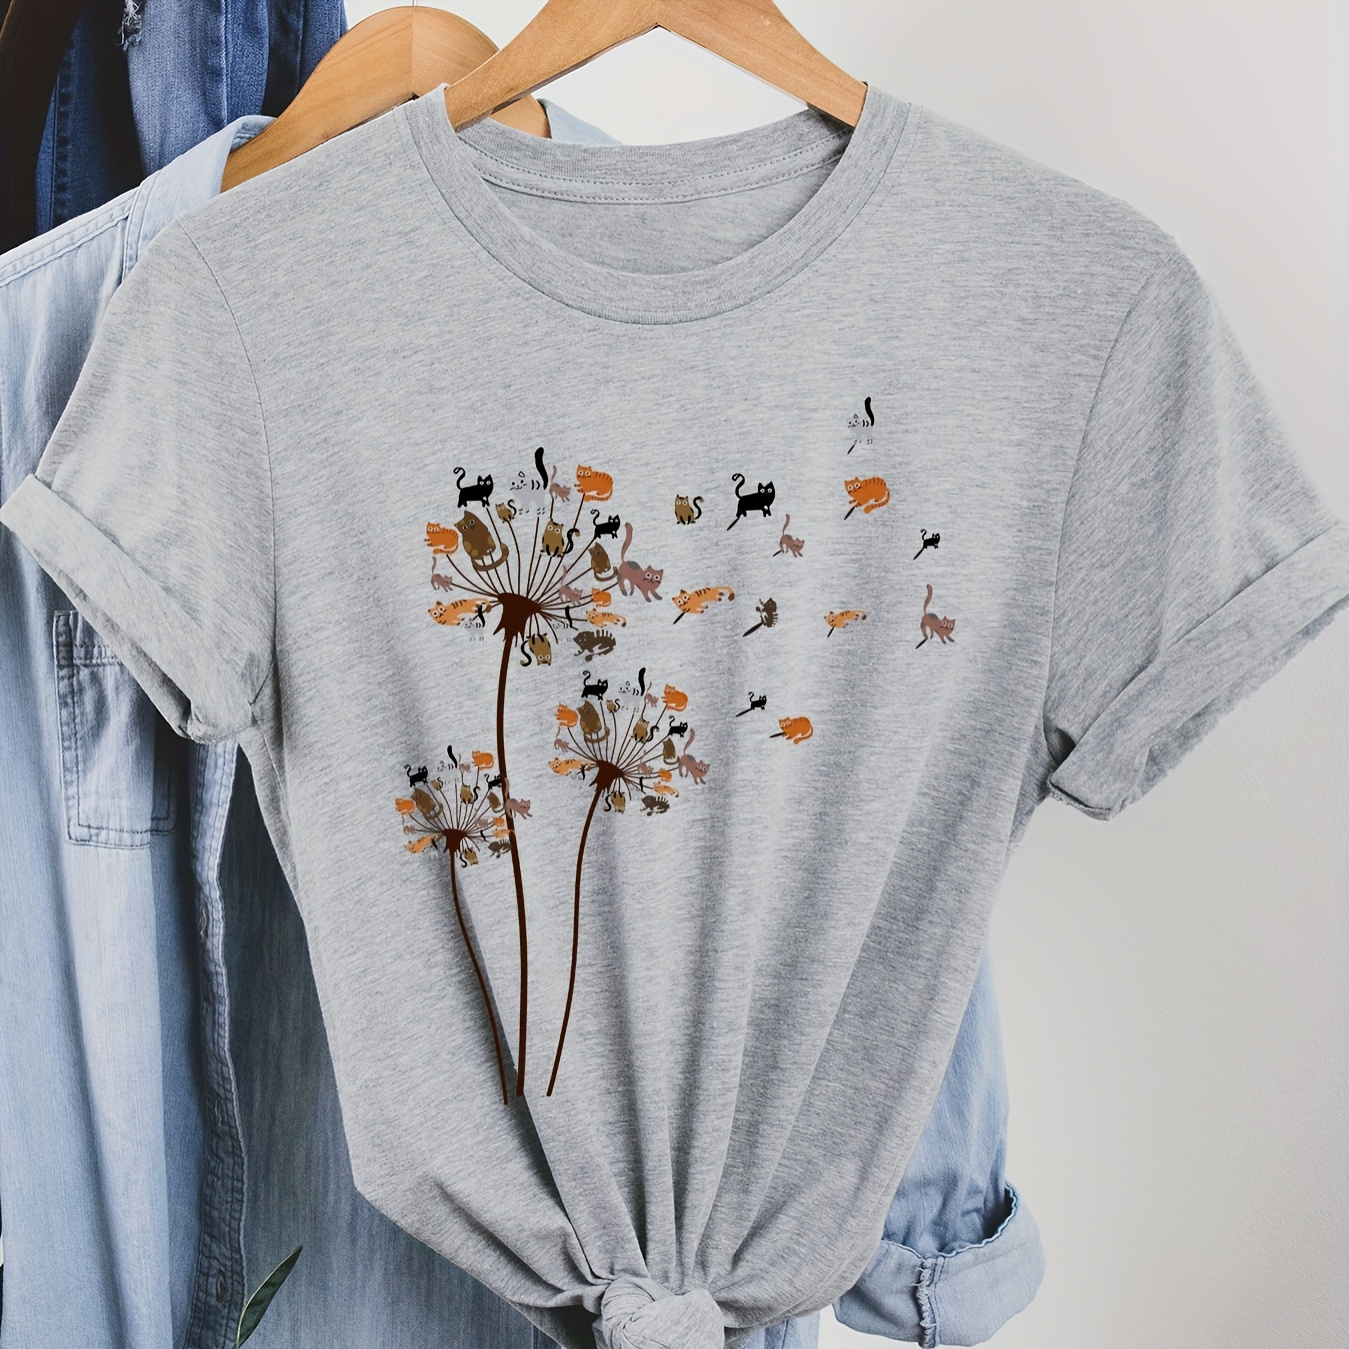 

Cat & Dandelion Print T-shirt, Short Sleeve Crew Neck Casual Top For Summer & Spring, Women's Clothing